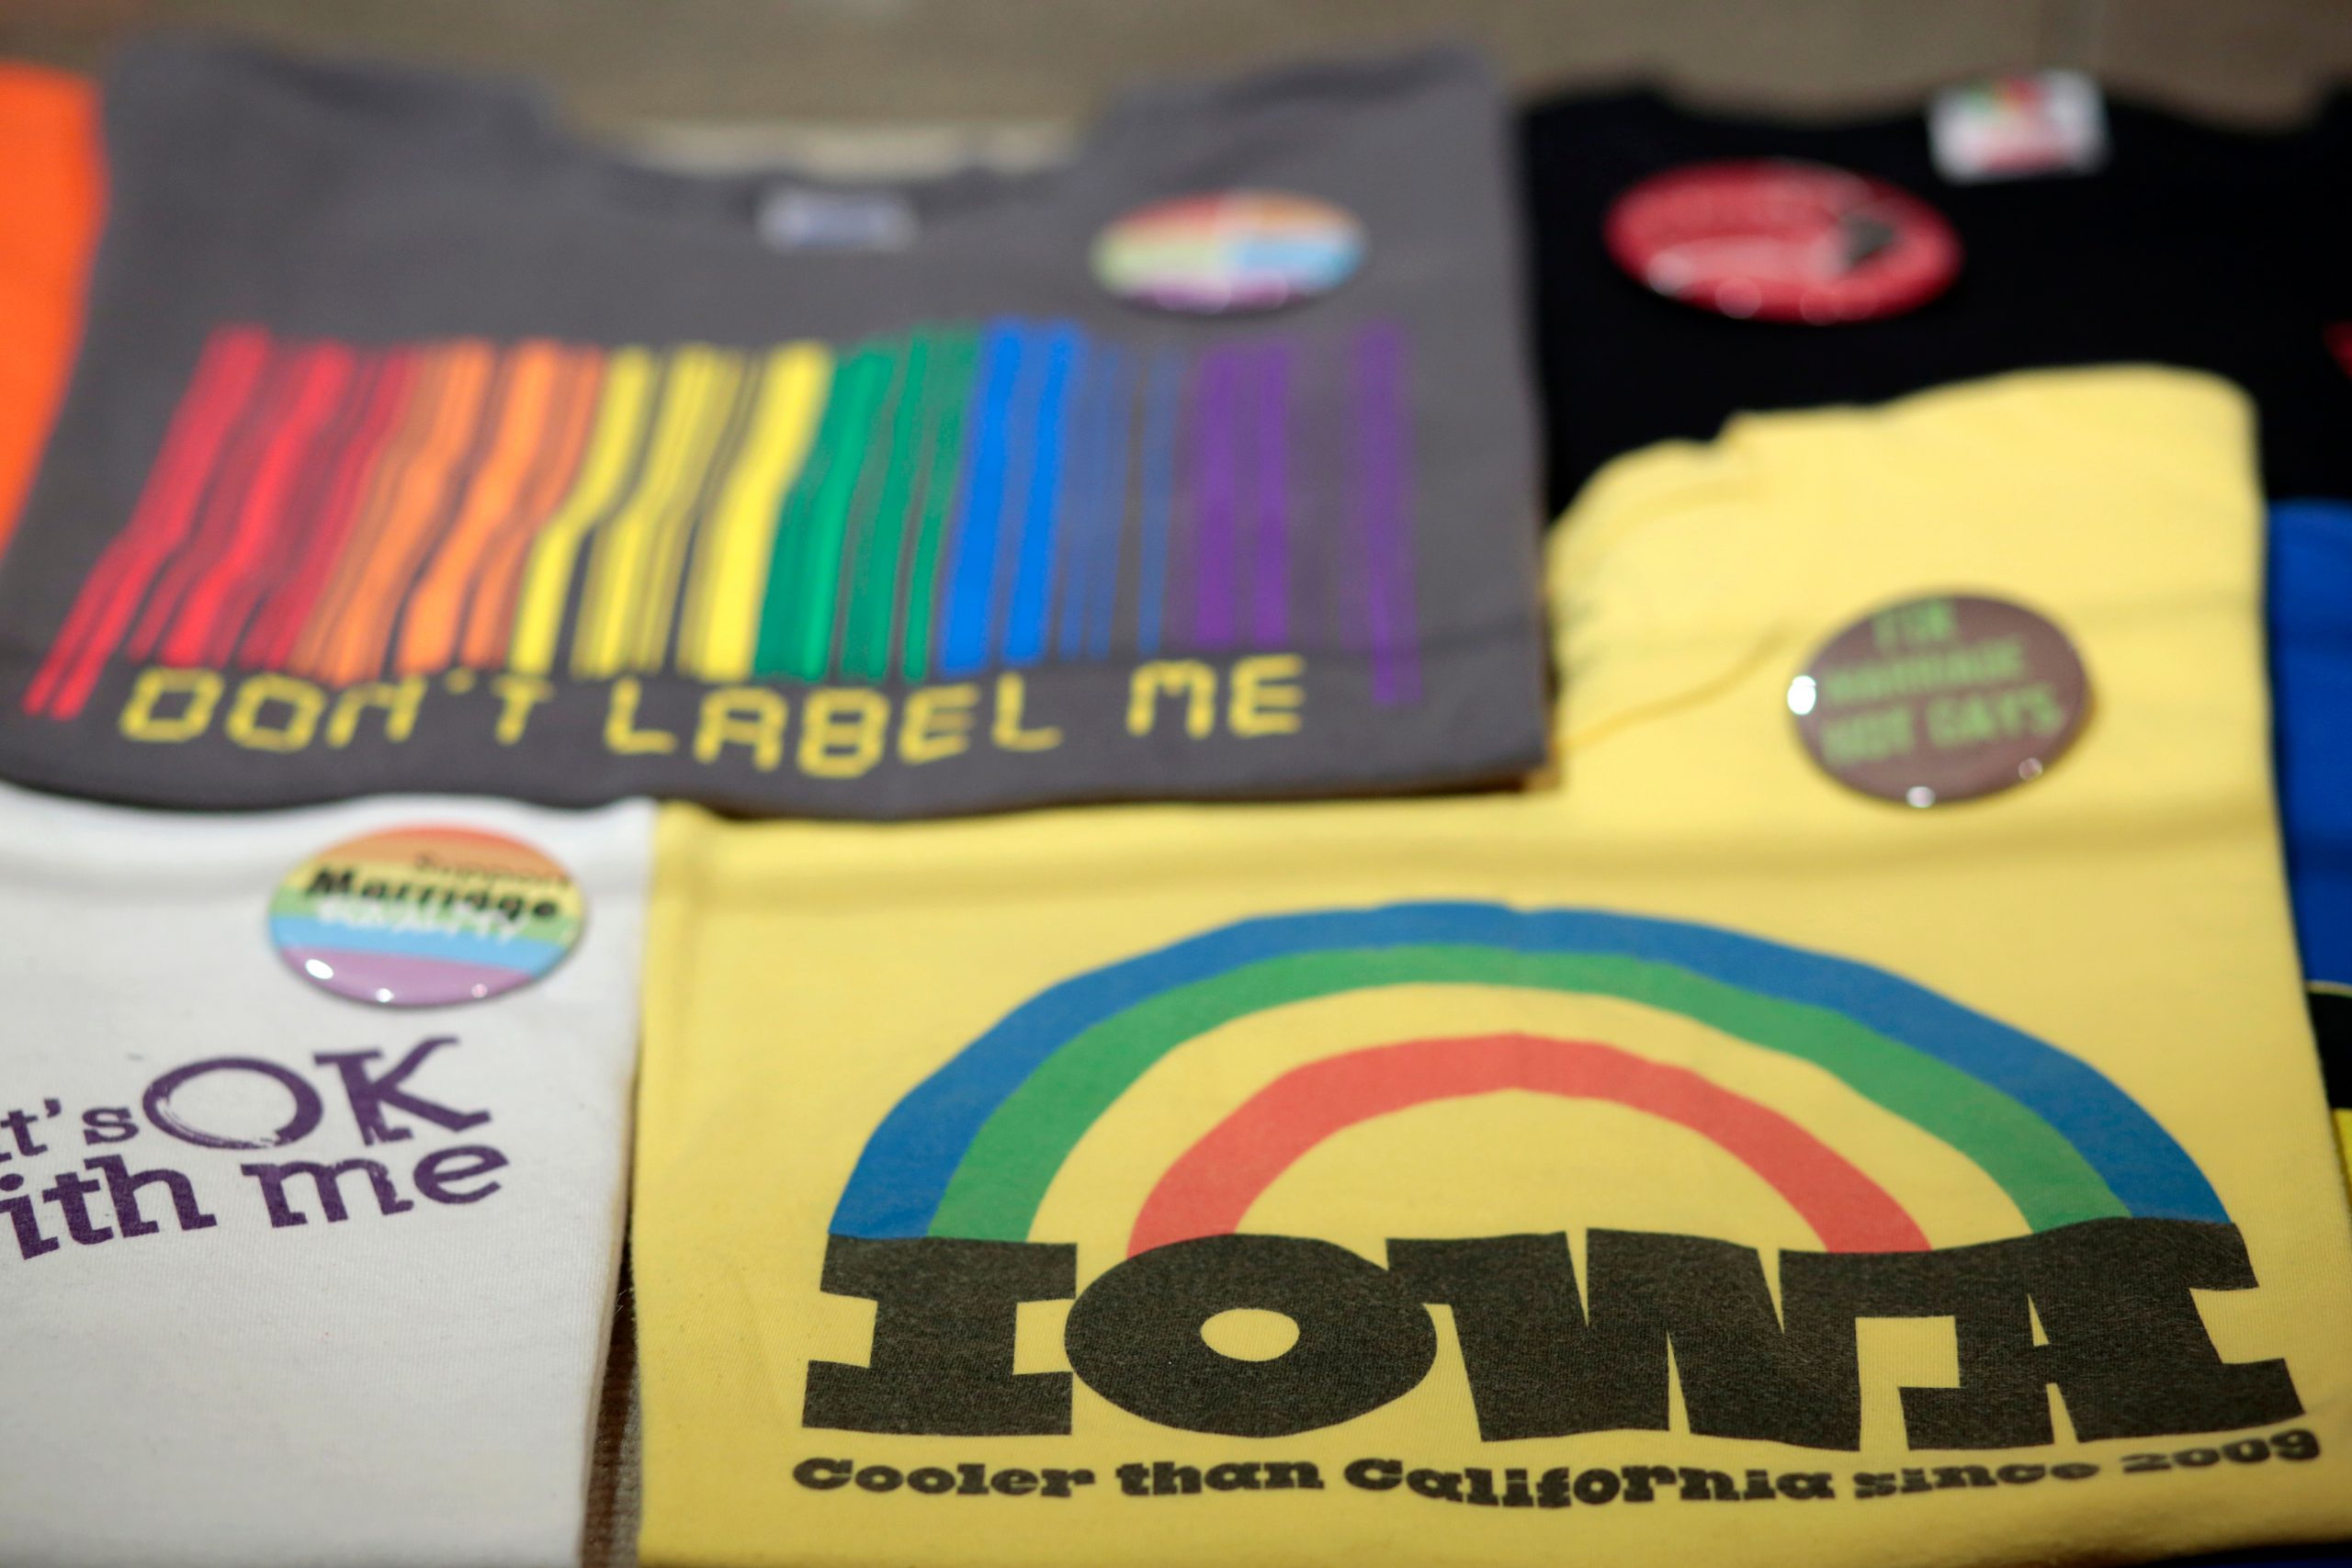 Several t-shirts and buttons from "Overtly Proud" displayed flat in glass case.